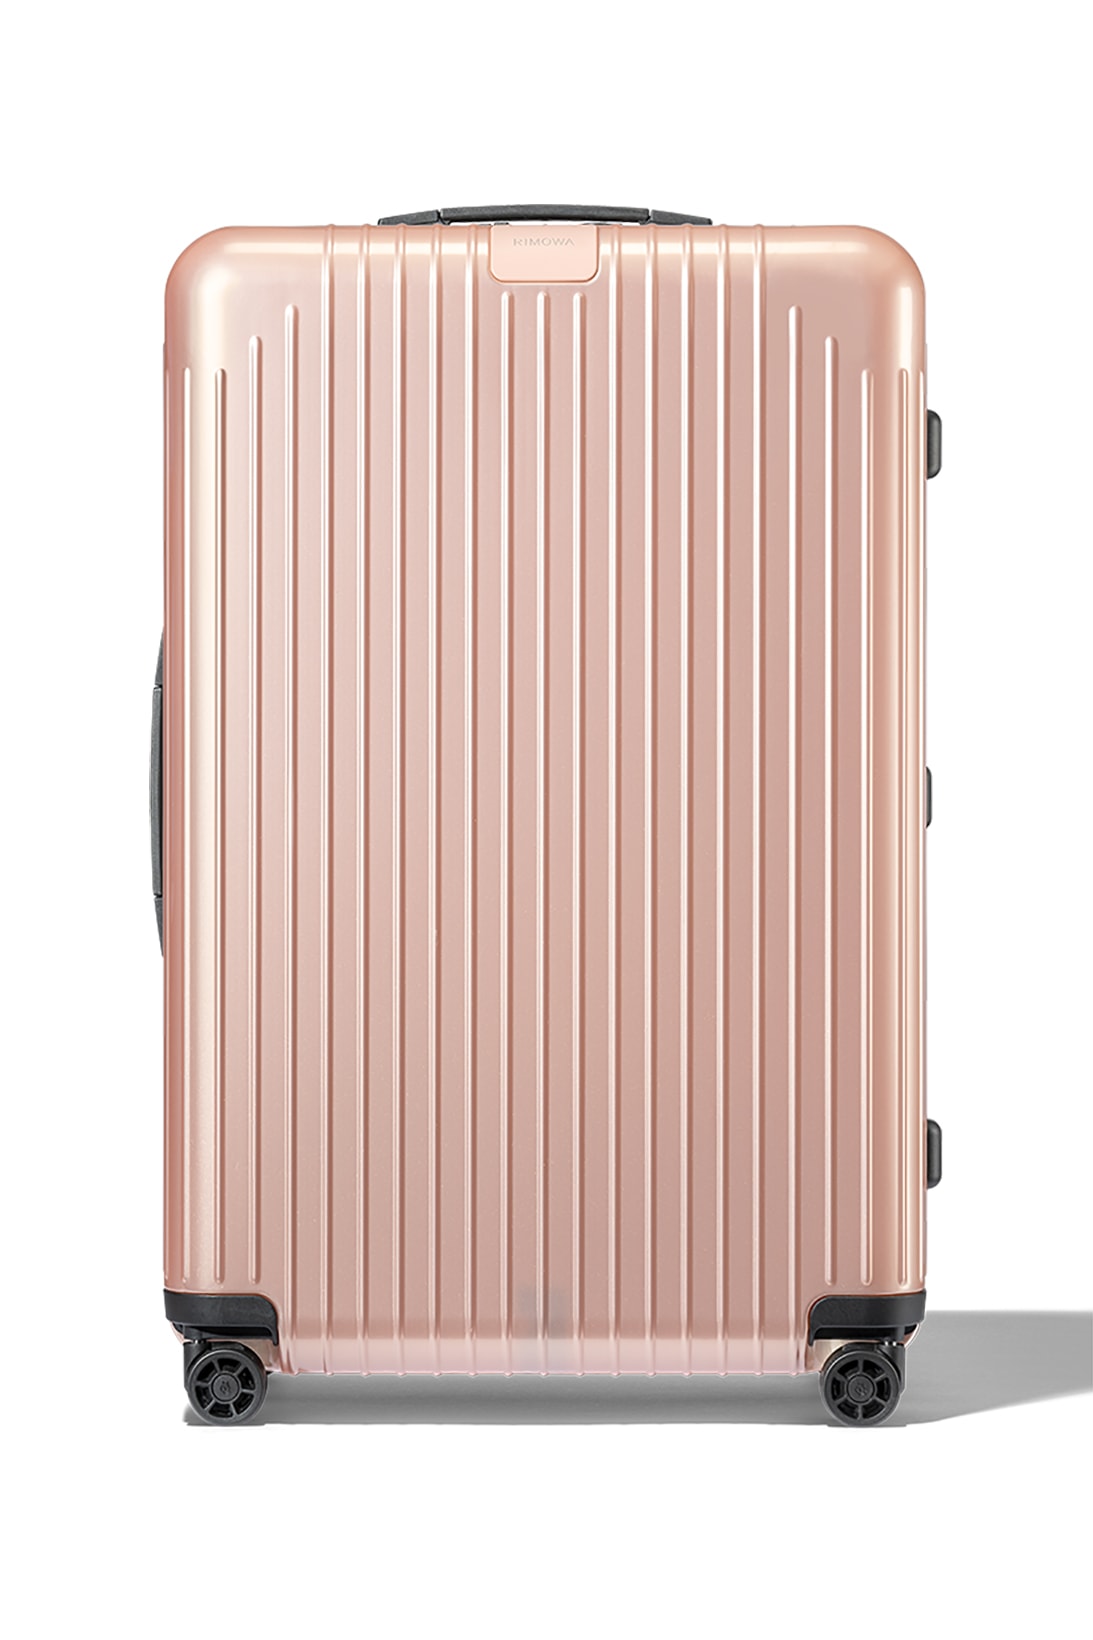 rimowa essential lite suitcase luggage bags rose gold pink black travel cabin check in